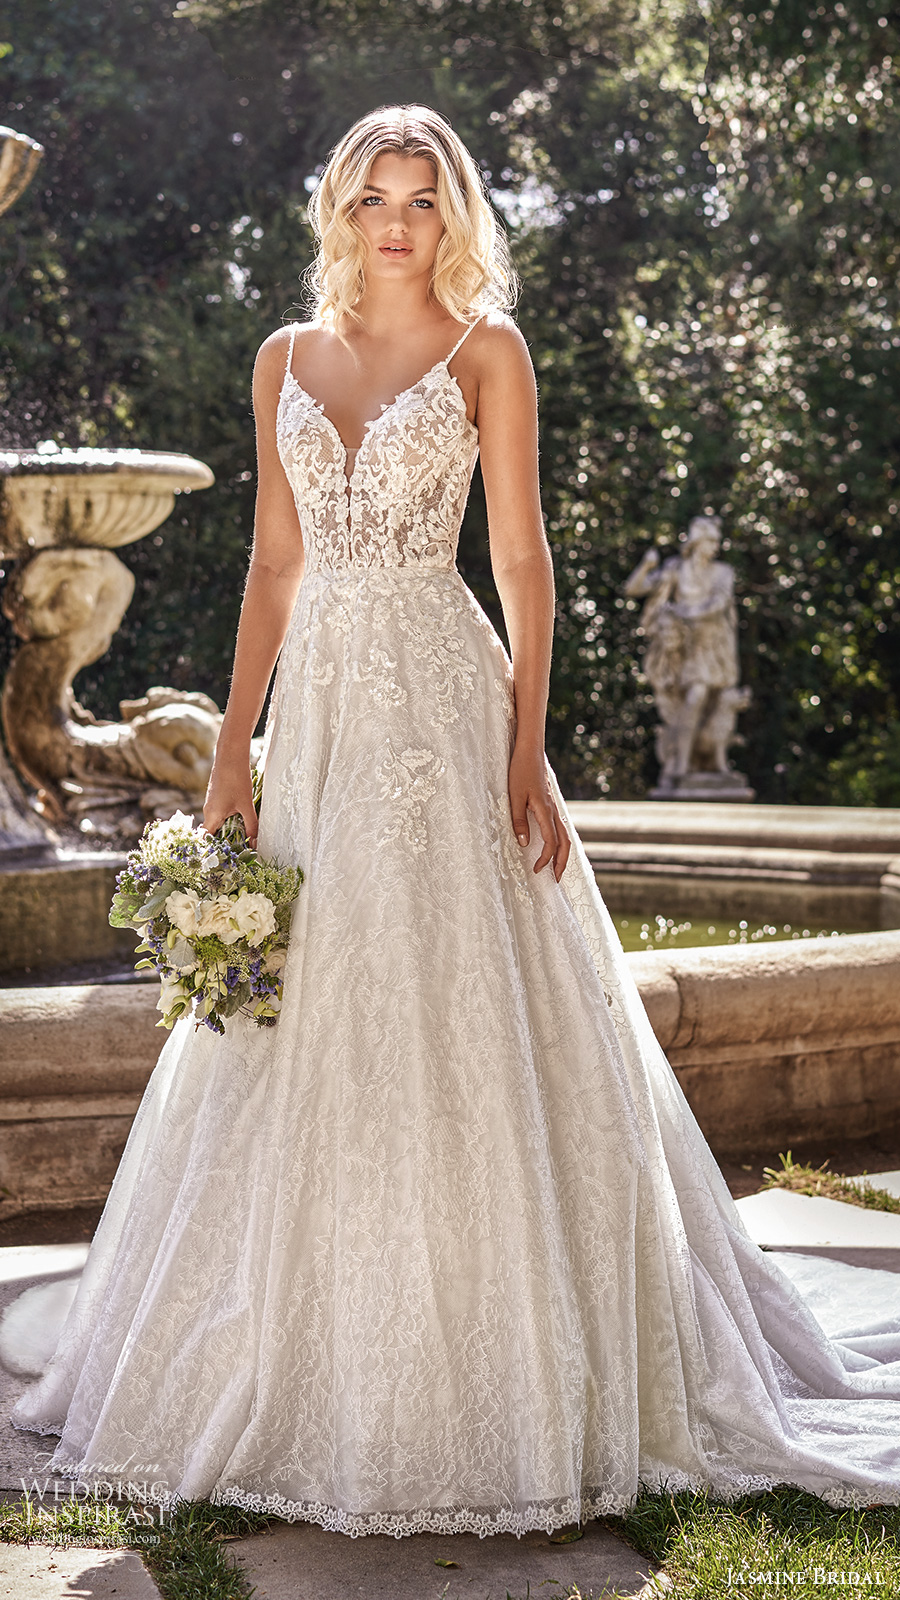 jasmine spring 2020 collection sleeveless thin straps plunging sweetheart neckline fully embellished a line ball gown wedding dress chapel train (8) mv